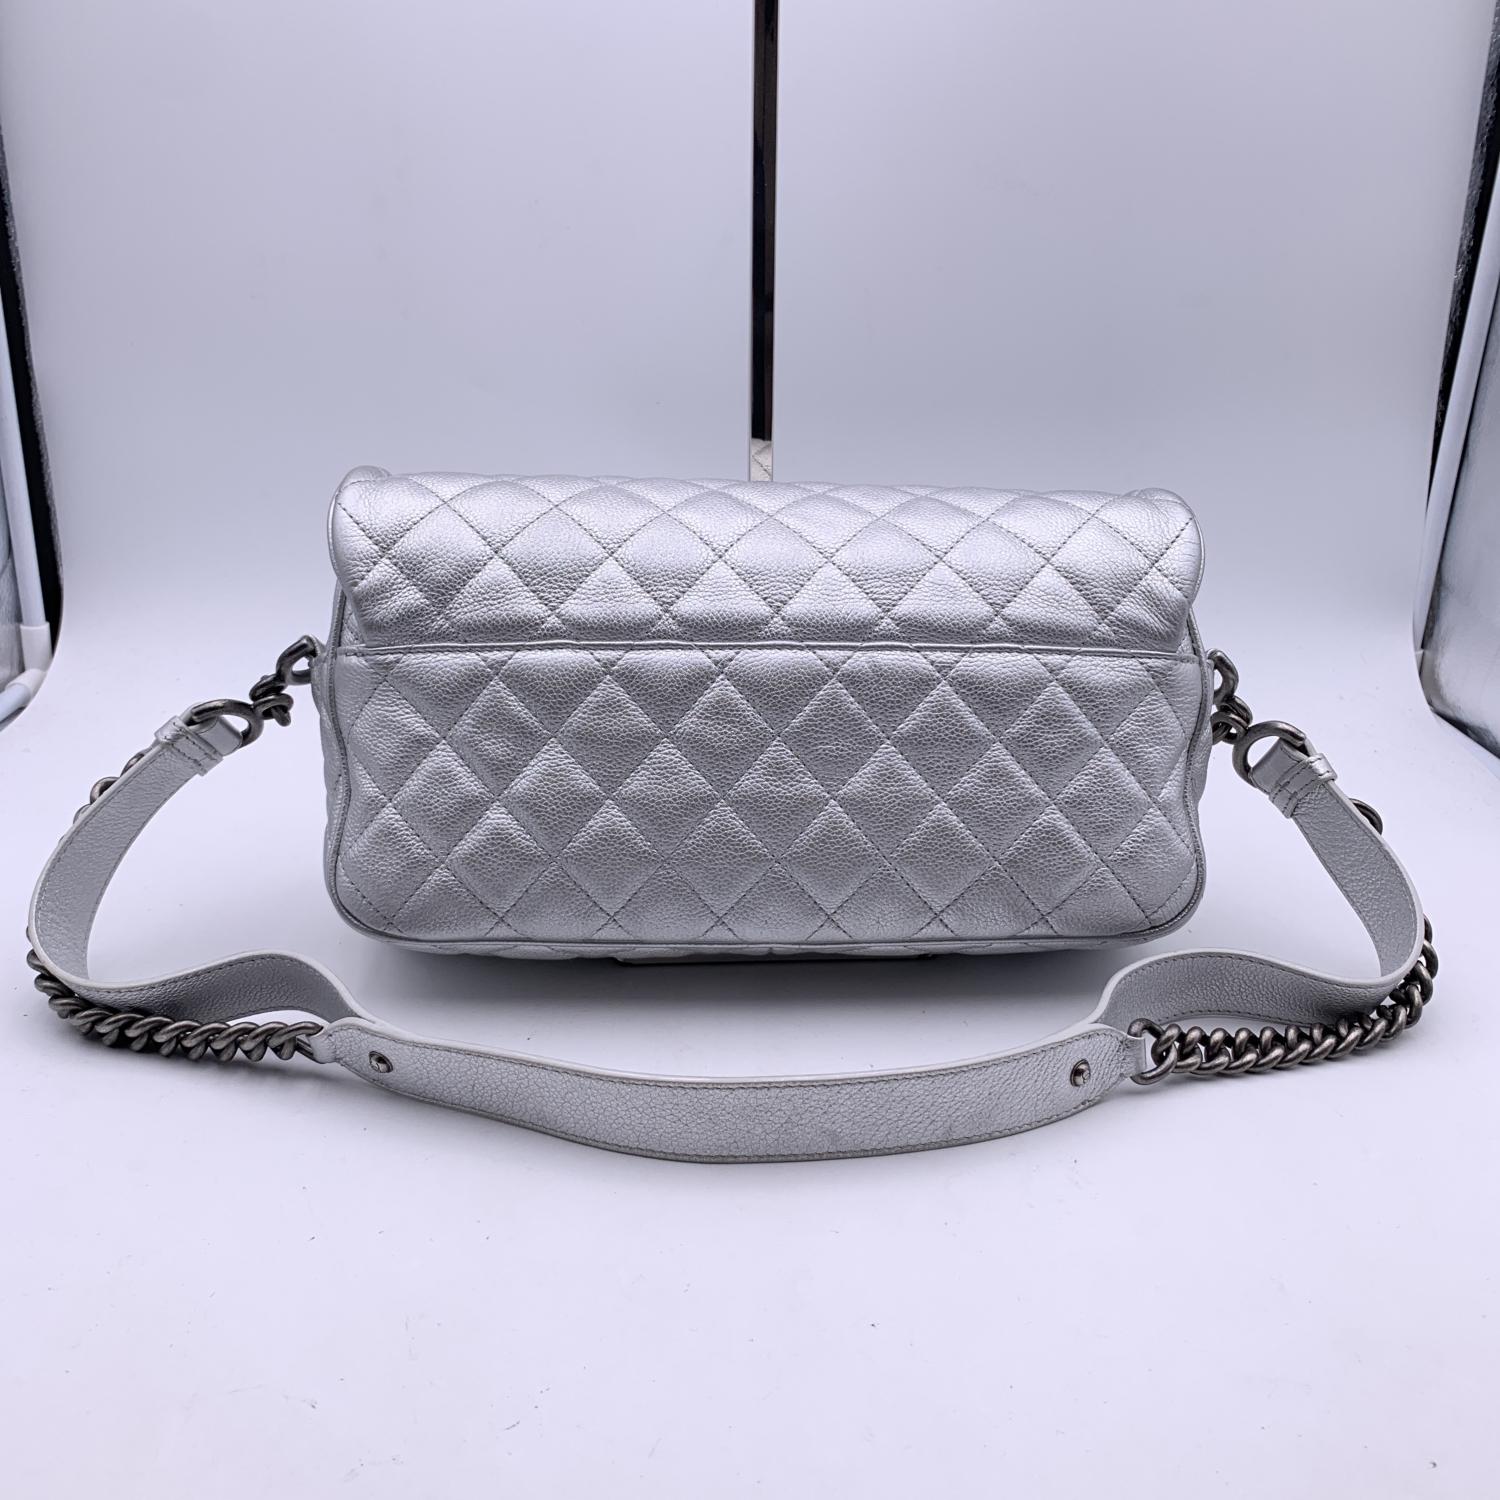 Chanel Airline 2016 Silver Metal Quilted Leather Easy Flap Shoulder Bag 5